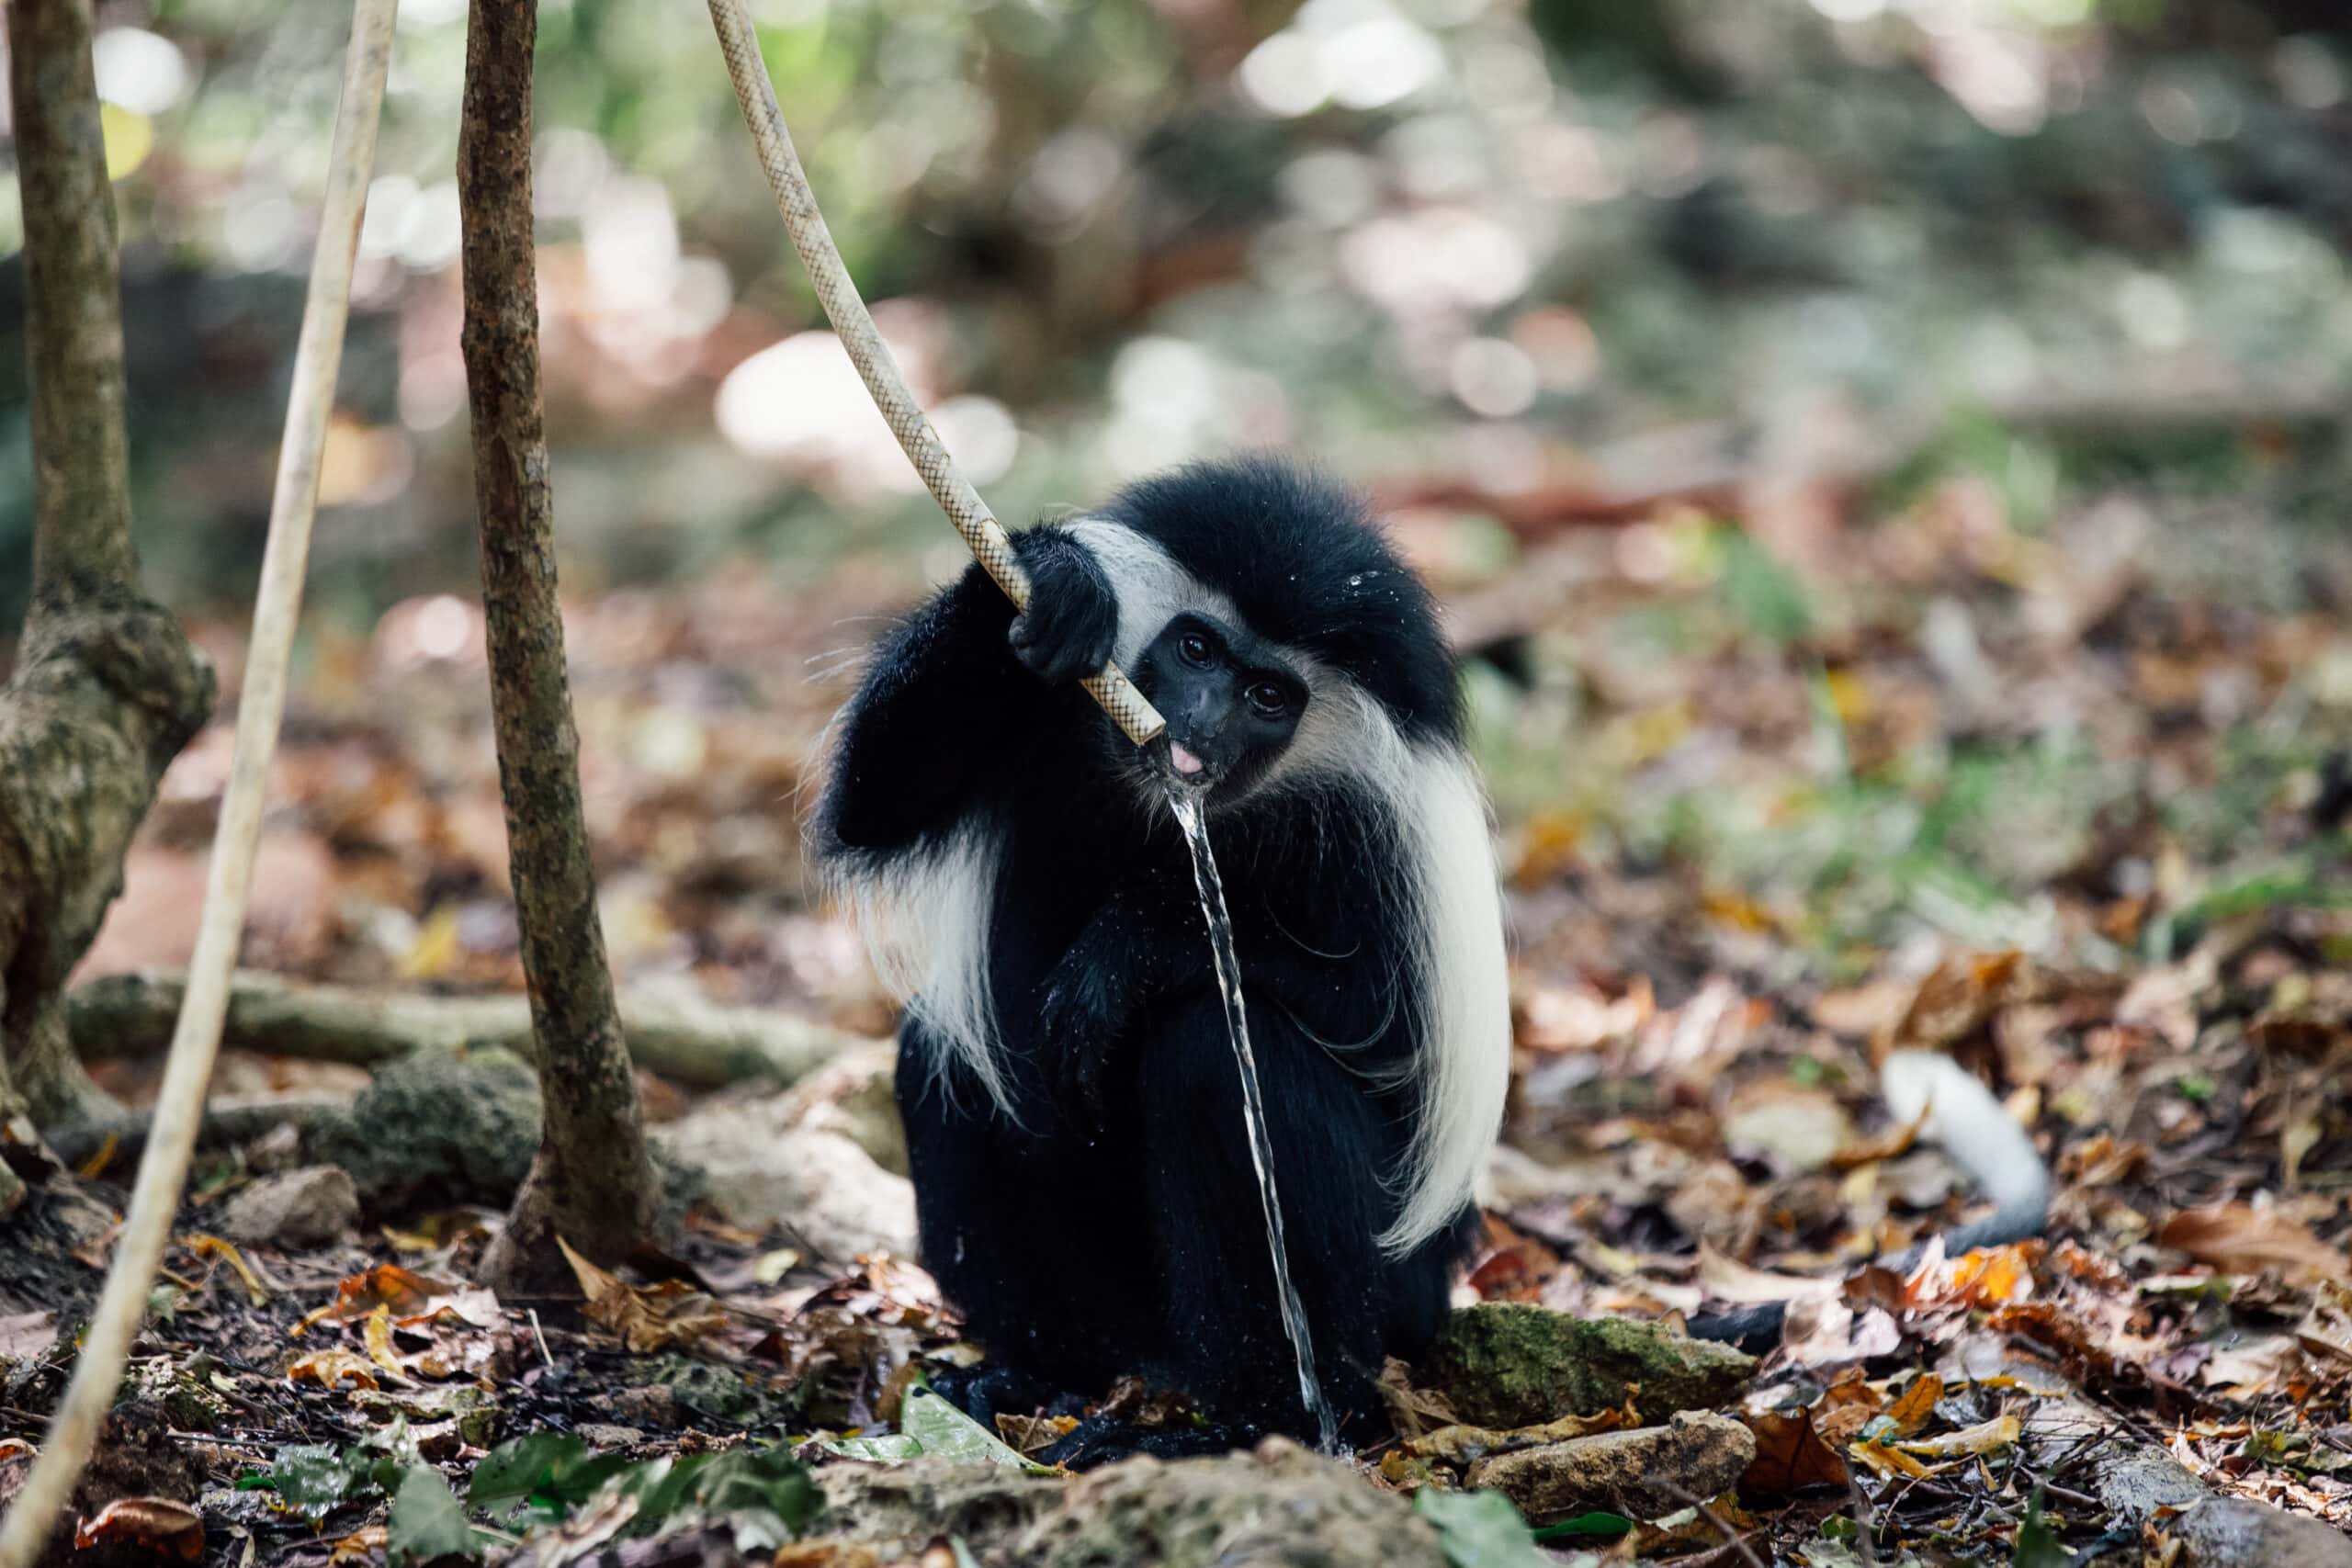 Colobus drinking from hose